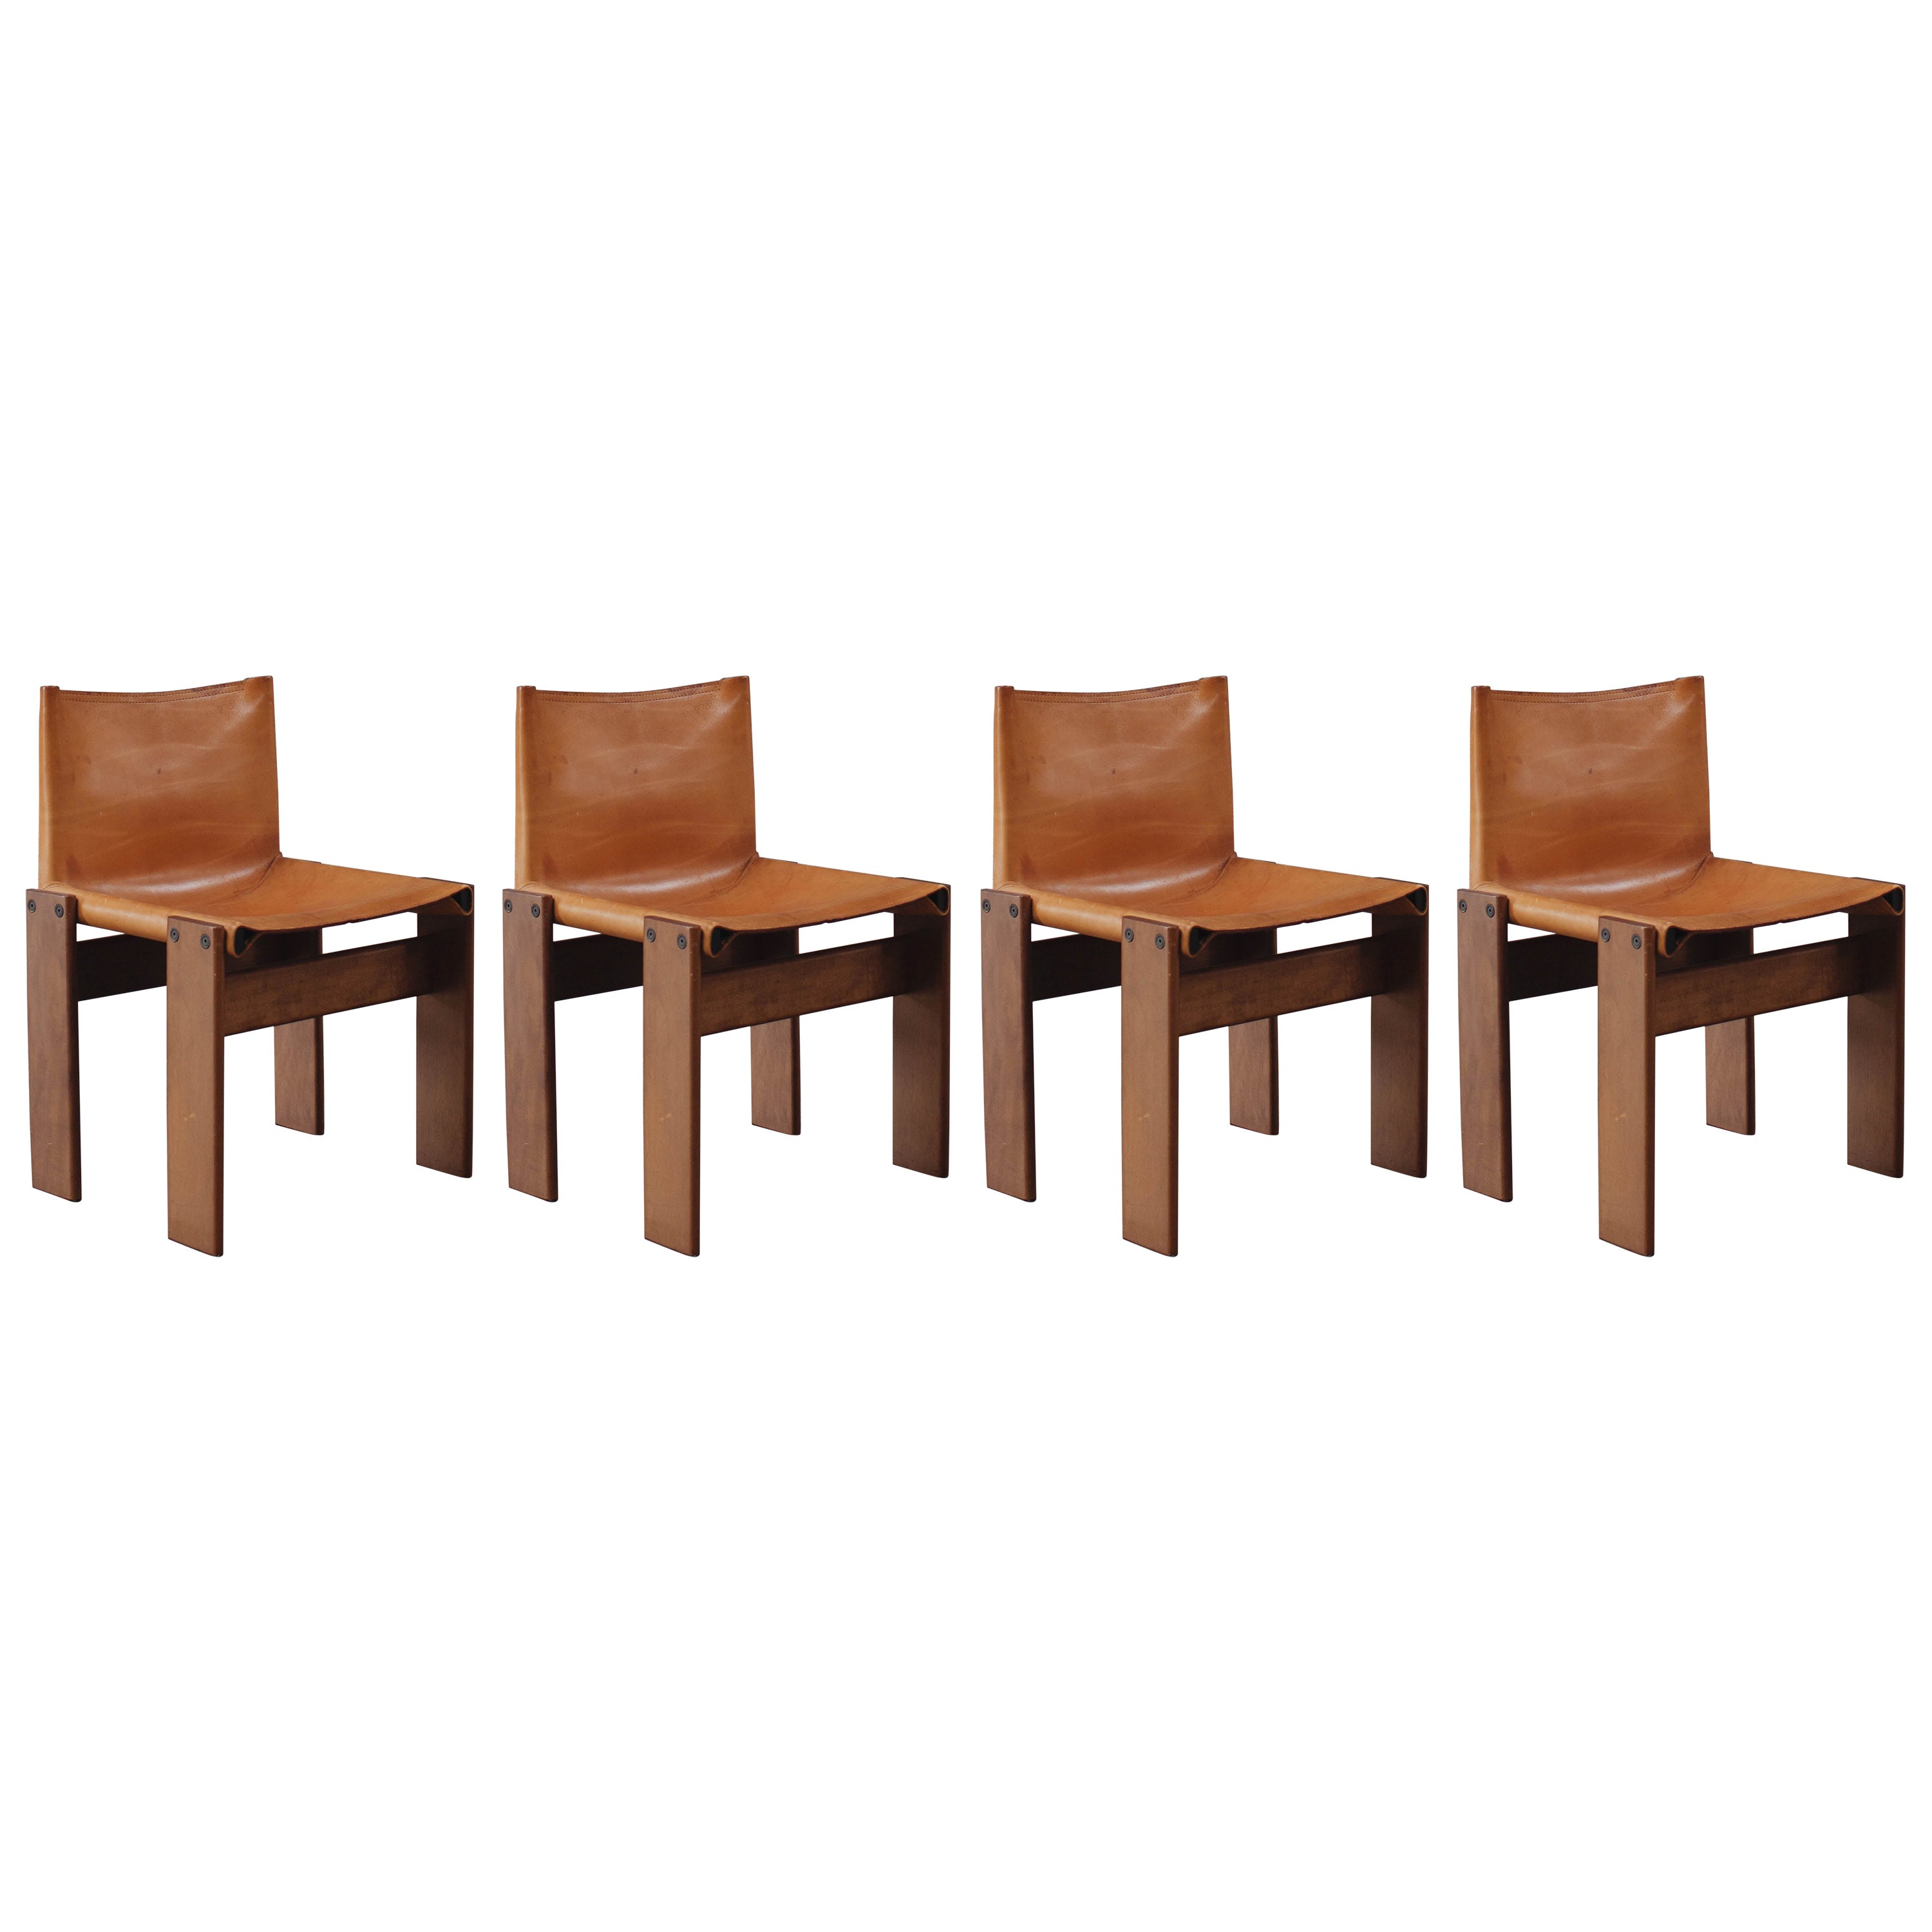 Afra & Tobia Scarpa "Monk" Dining Chairs for Molteni, 1974, Set of 4 For Sale